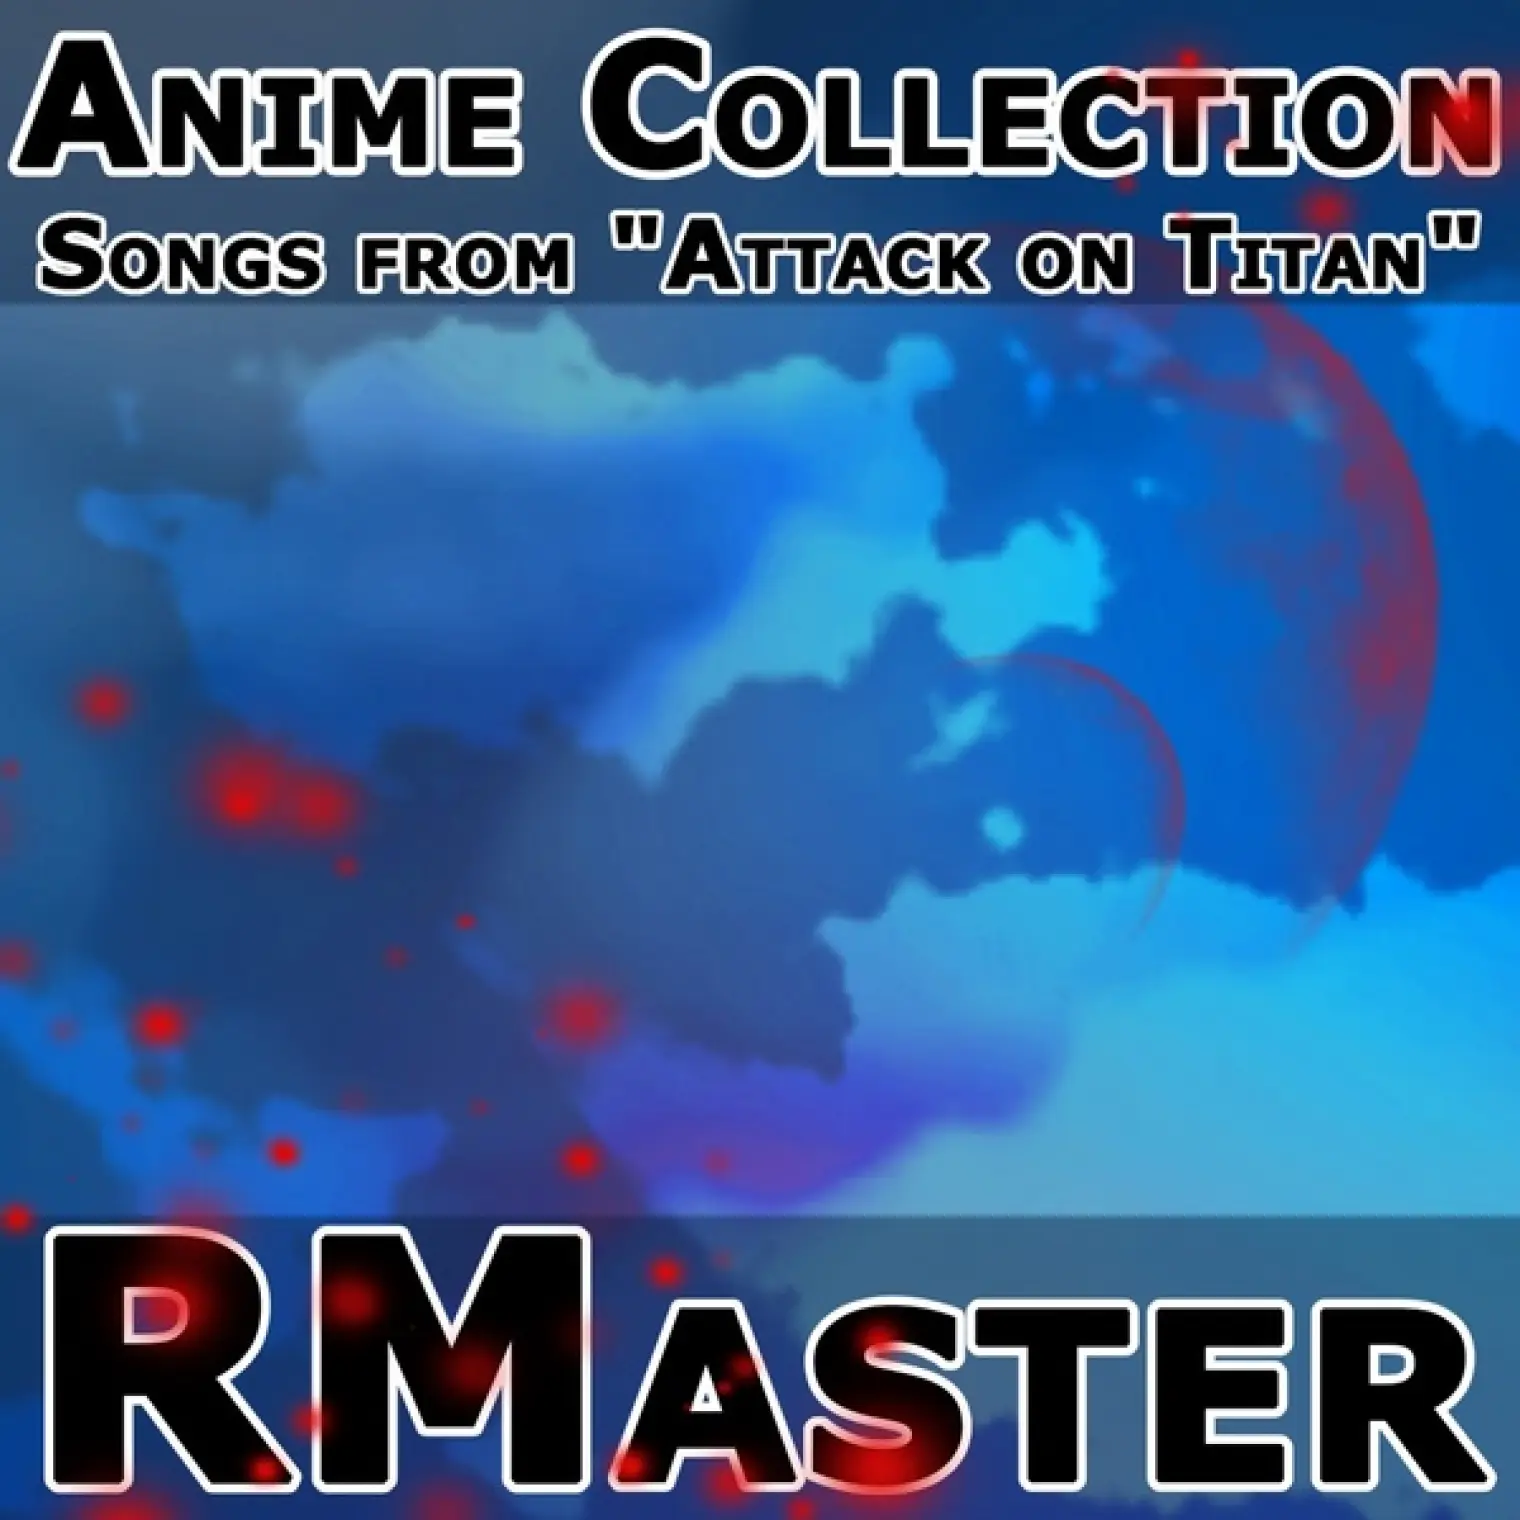 Anime Collection Songs from Attack on Titan -  RMaster 